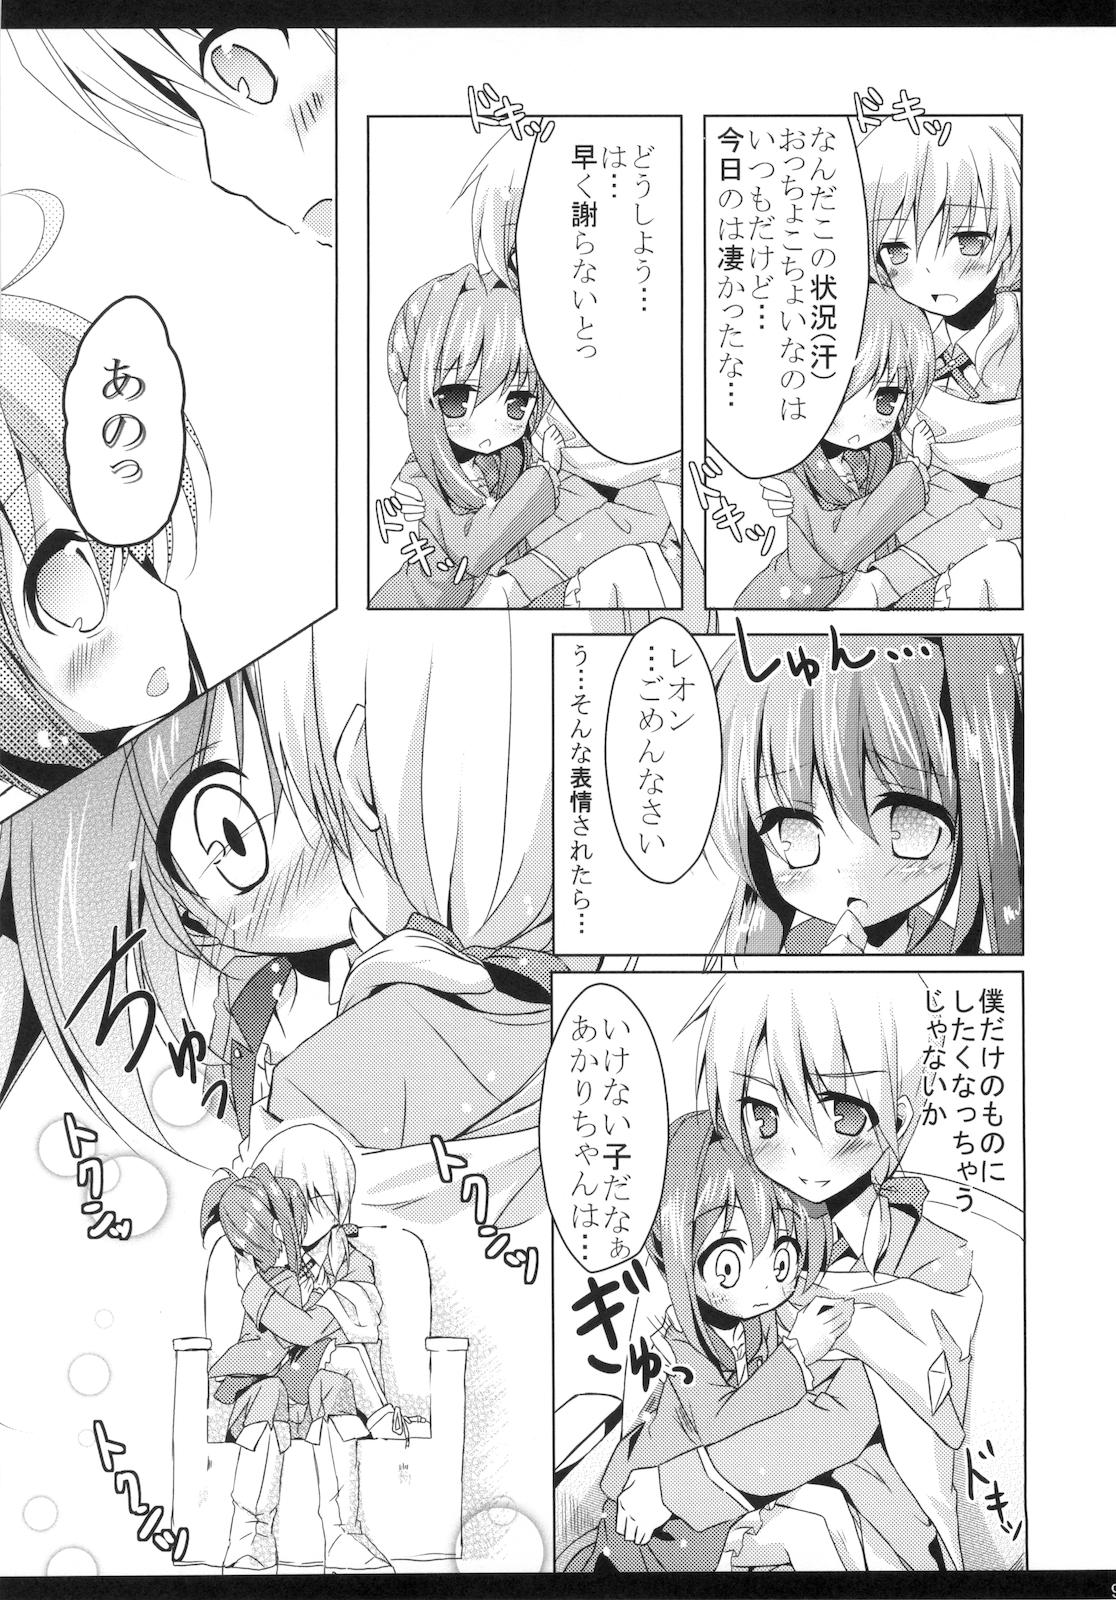 Jeans Akari no Susume - Jewelpet tinkle Gay Toys - Page 9